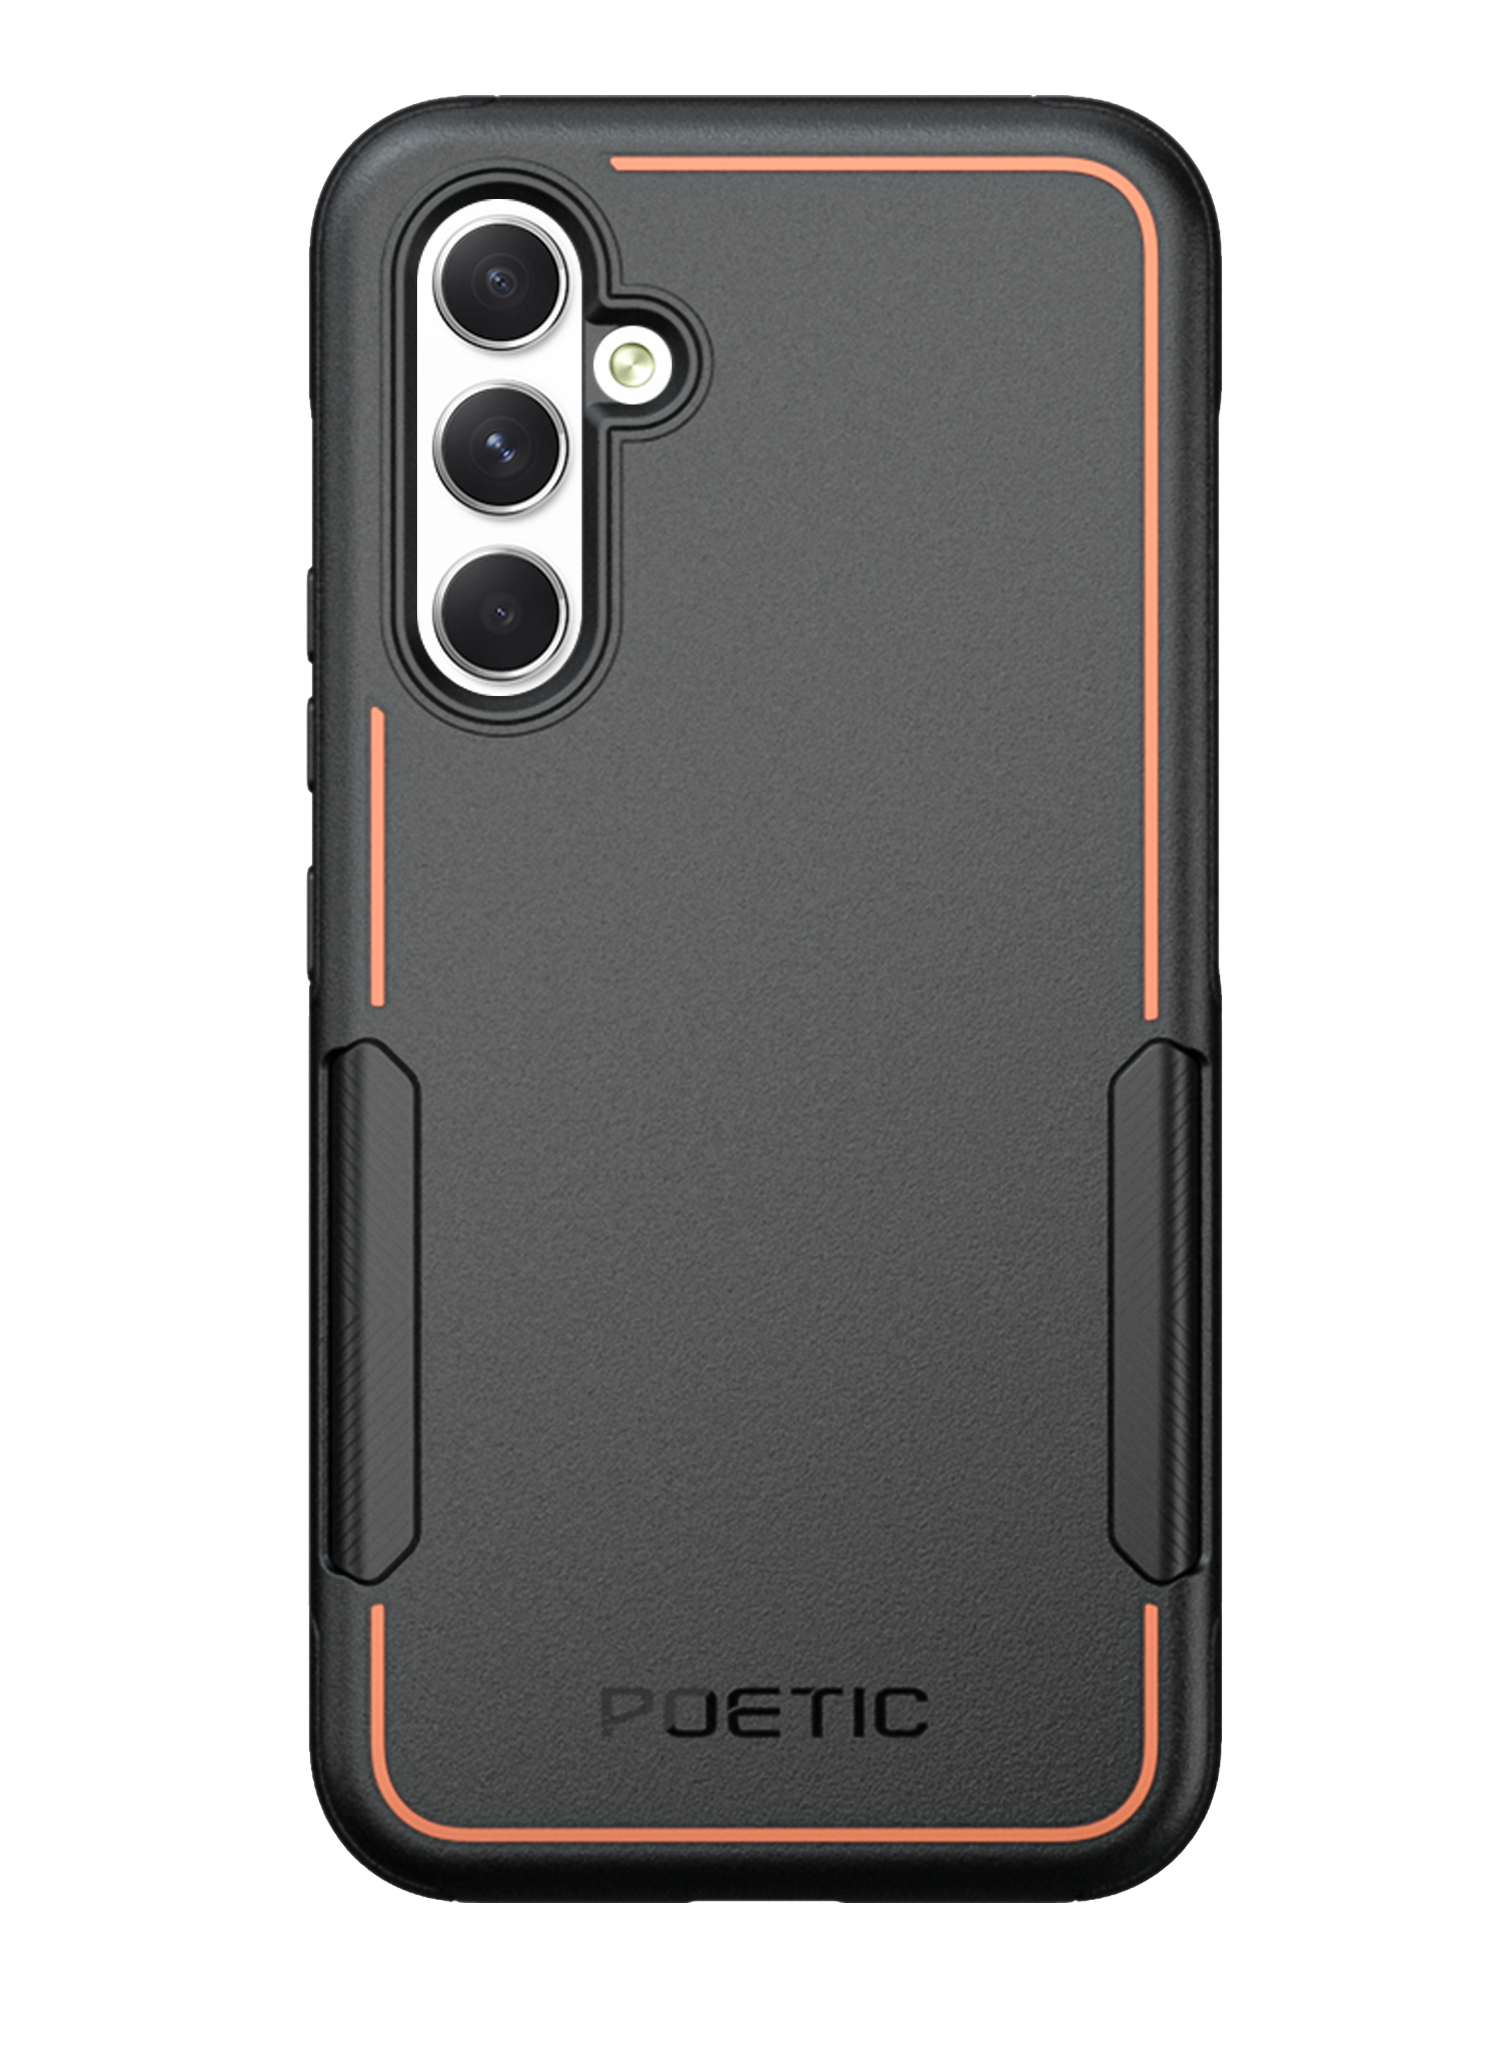 Samsung Galaxy A14 5G Case – Poetic Cases